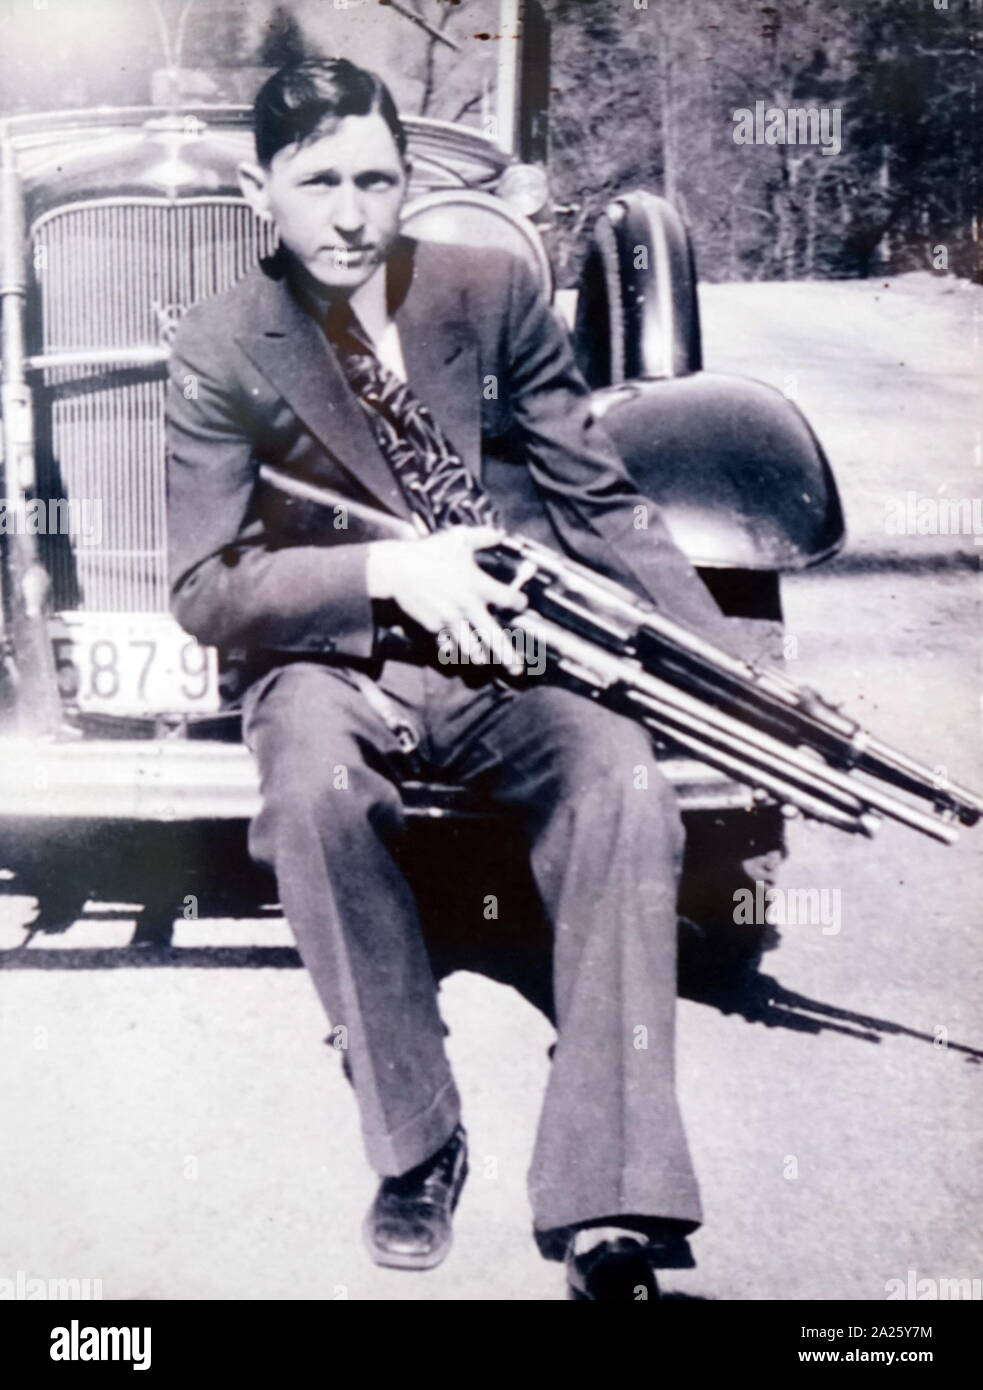 A photograph of Clyde Barrow. Clyde Chestnut Barrow (1909-1934) an American criminal who travelled around the Central United States with Bonnie Parker and their gang during the Great Depression. Stock Photo